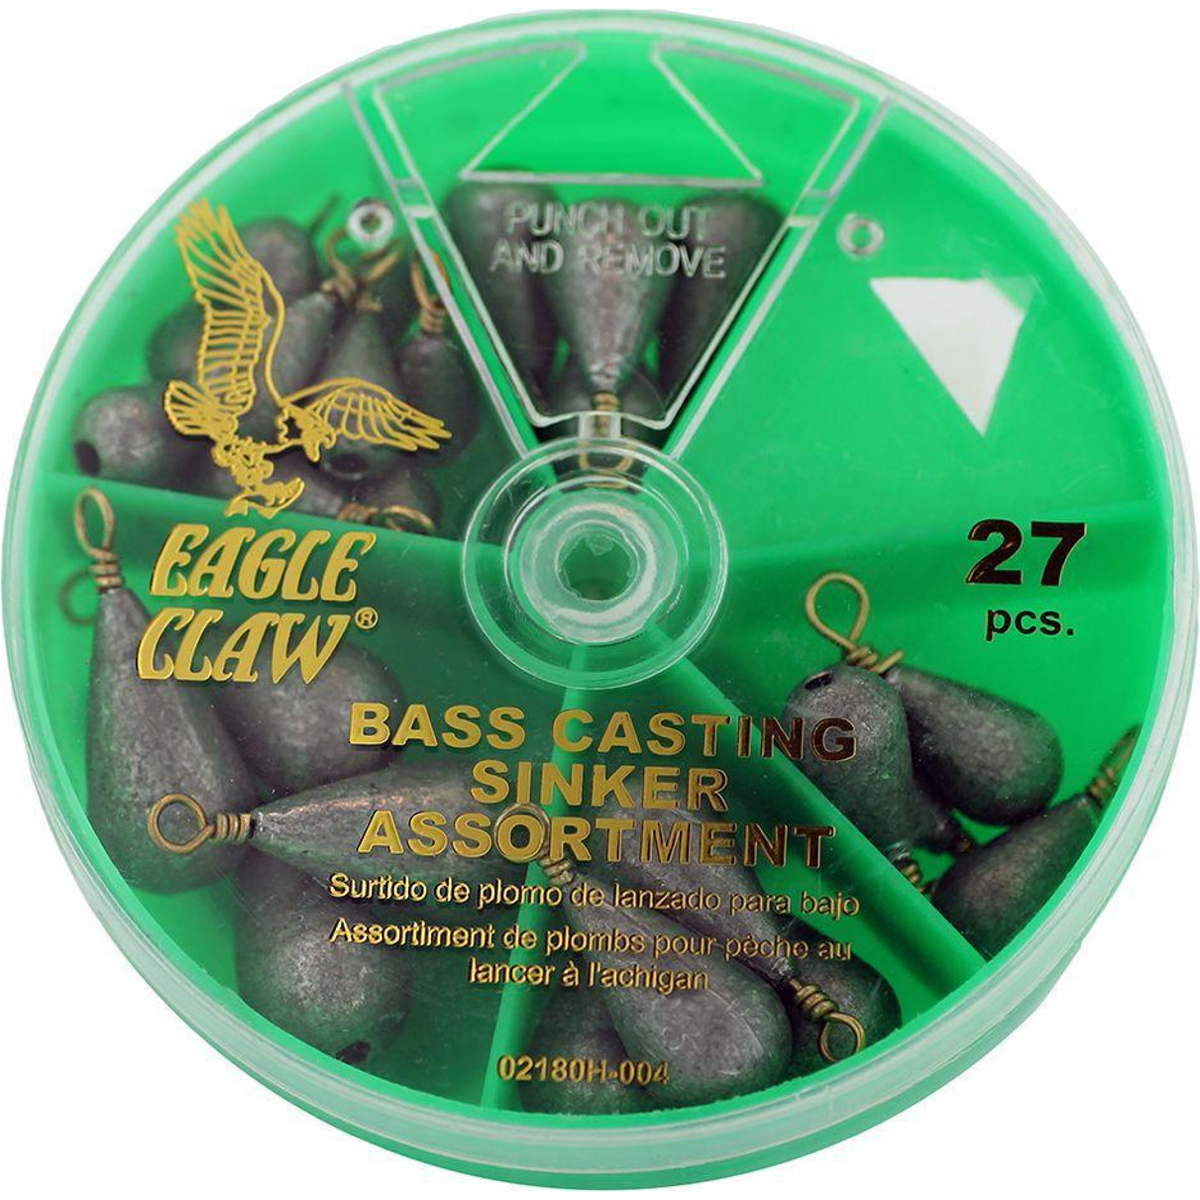 Photo of Eagle Claw 27-Piece Bass Casting Sinker Assortment for sale at United Tackle Shops.